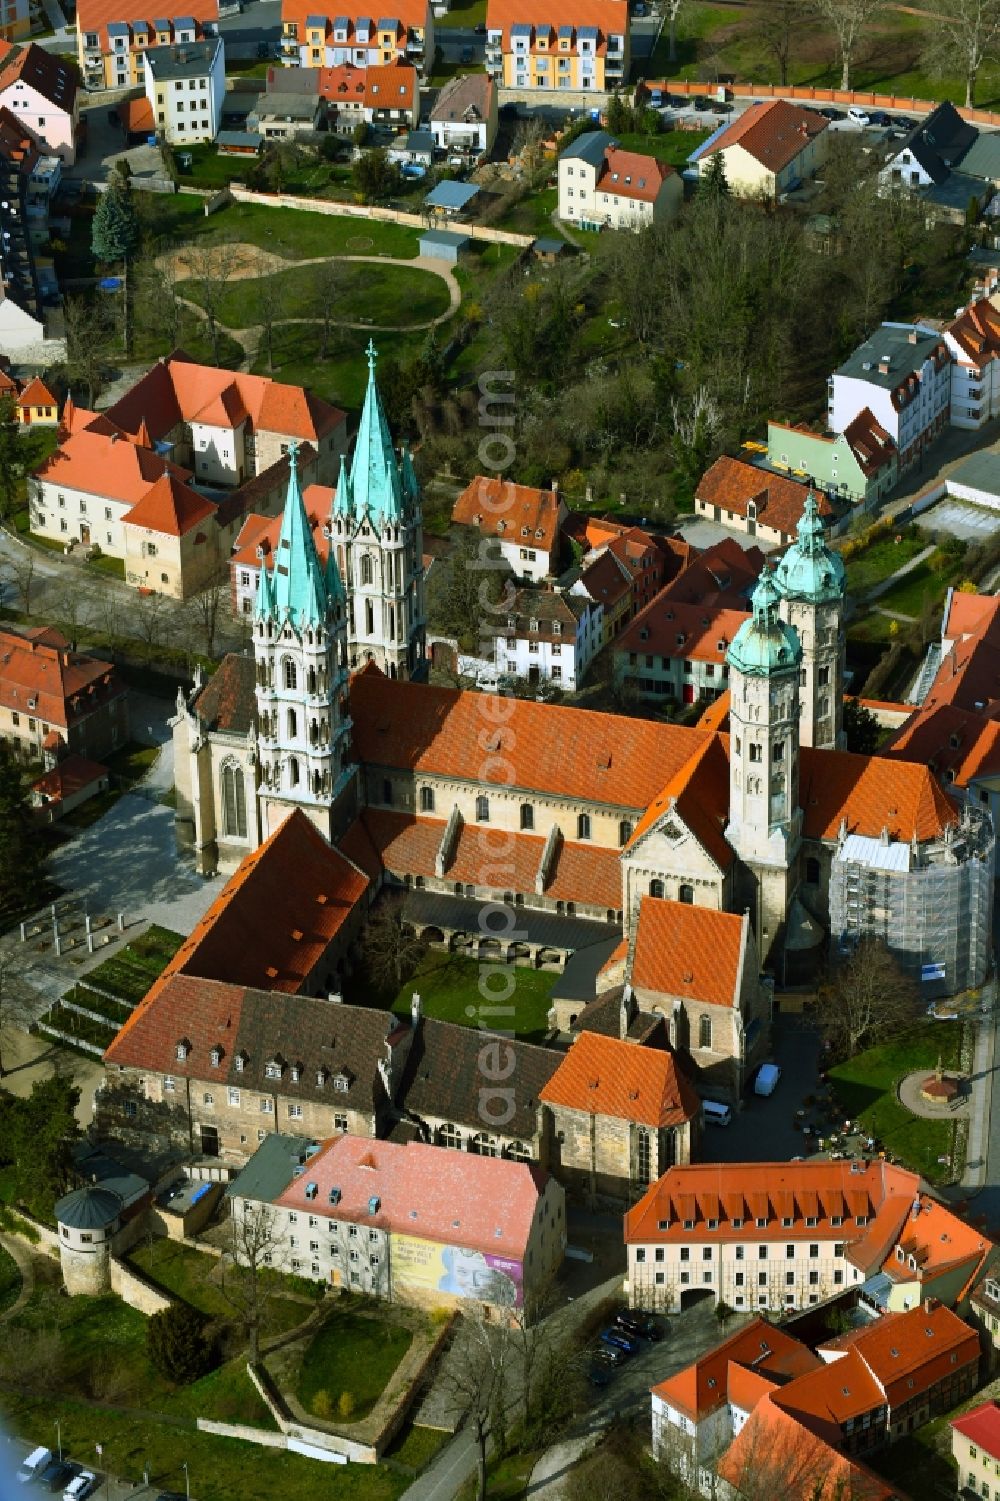 Naumburg (Saale) from above - Four-tower church building of the UNESCO World Heritage Site Naumburg Cathedral of St. Peter and St. Paul on Domplatz in Naumburg - Saale - in the state Saxony-Anhalt, Germany